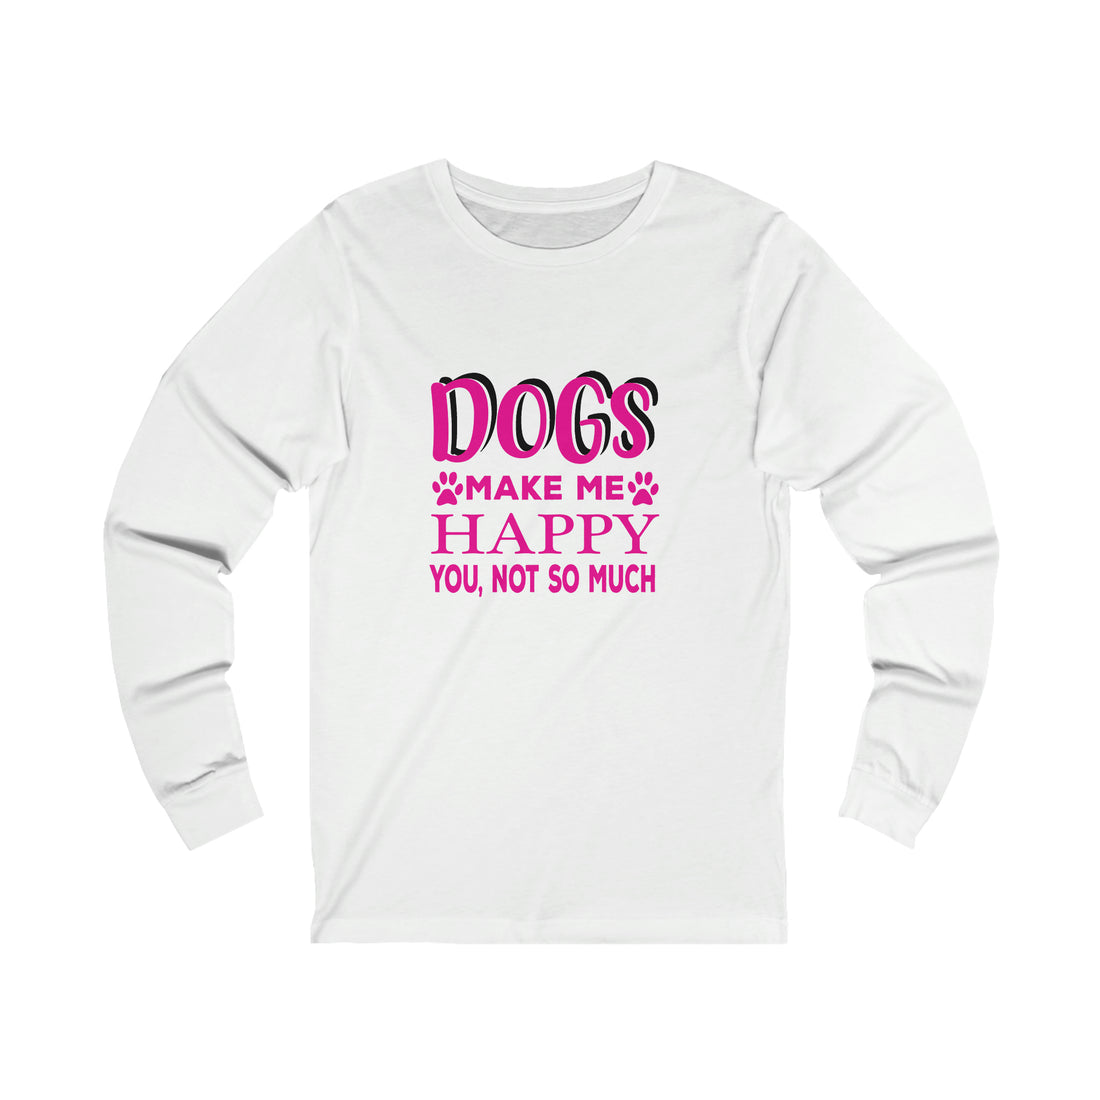 Dogs Make Me Happy You Not So Much - Unisex Jersey Long Sleeve Tee